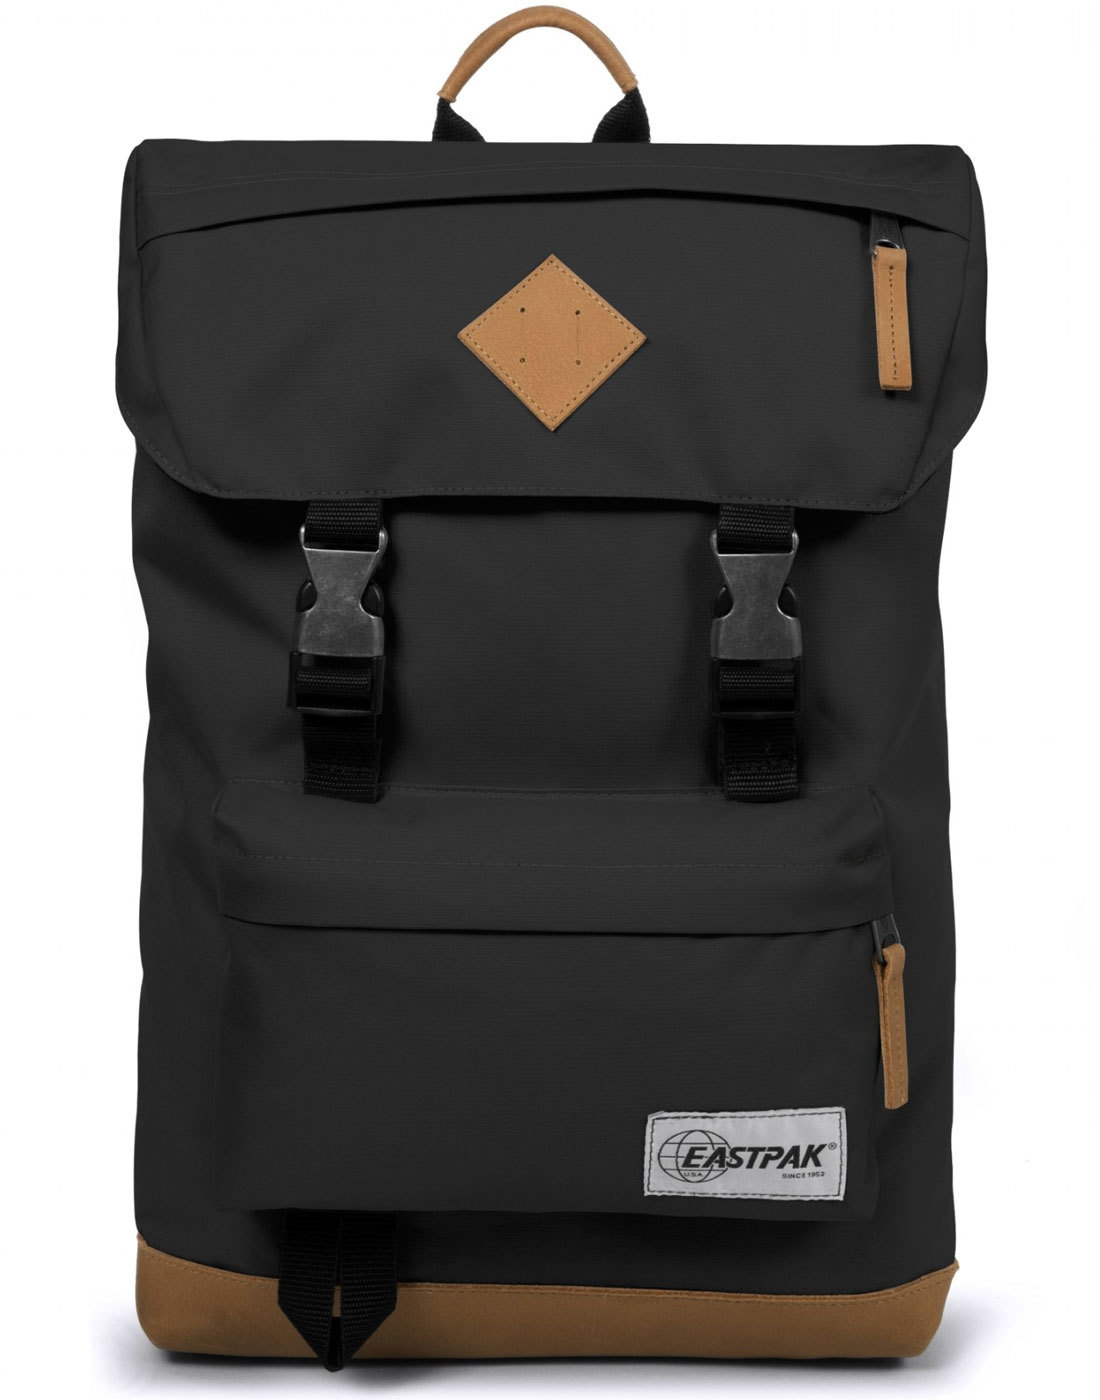 Rowlo EASTPAK Classic Laptop Backpack - Into Black